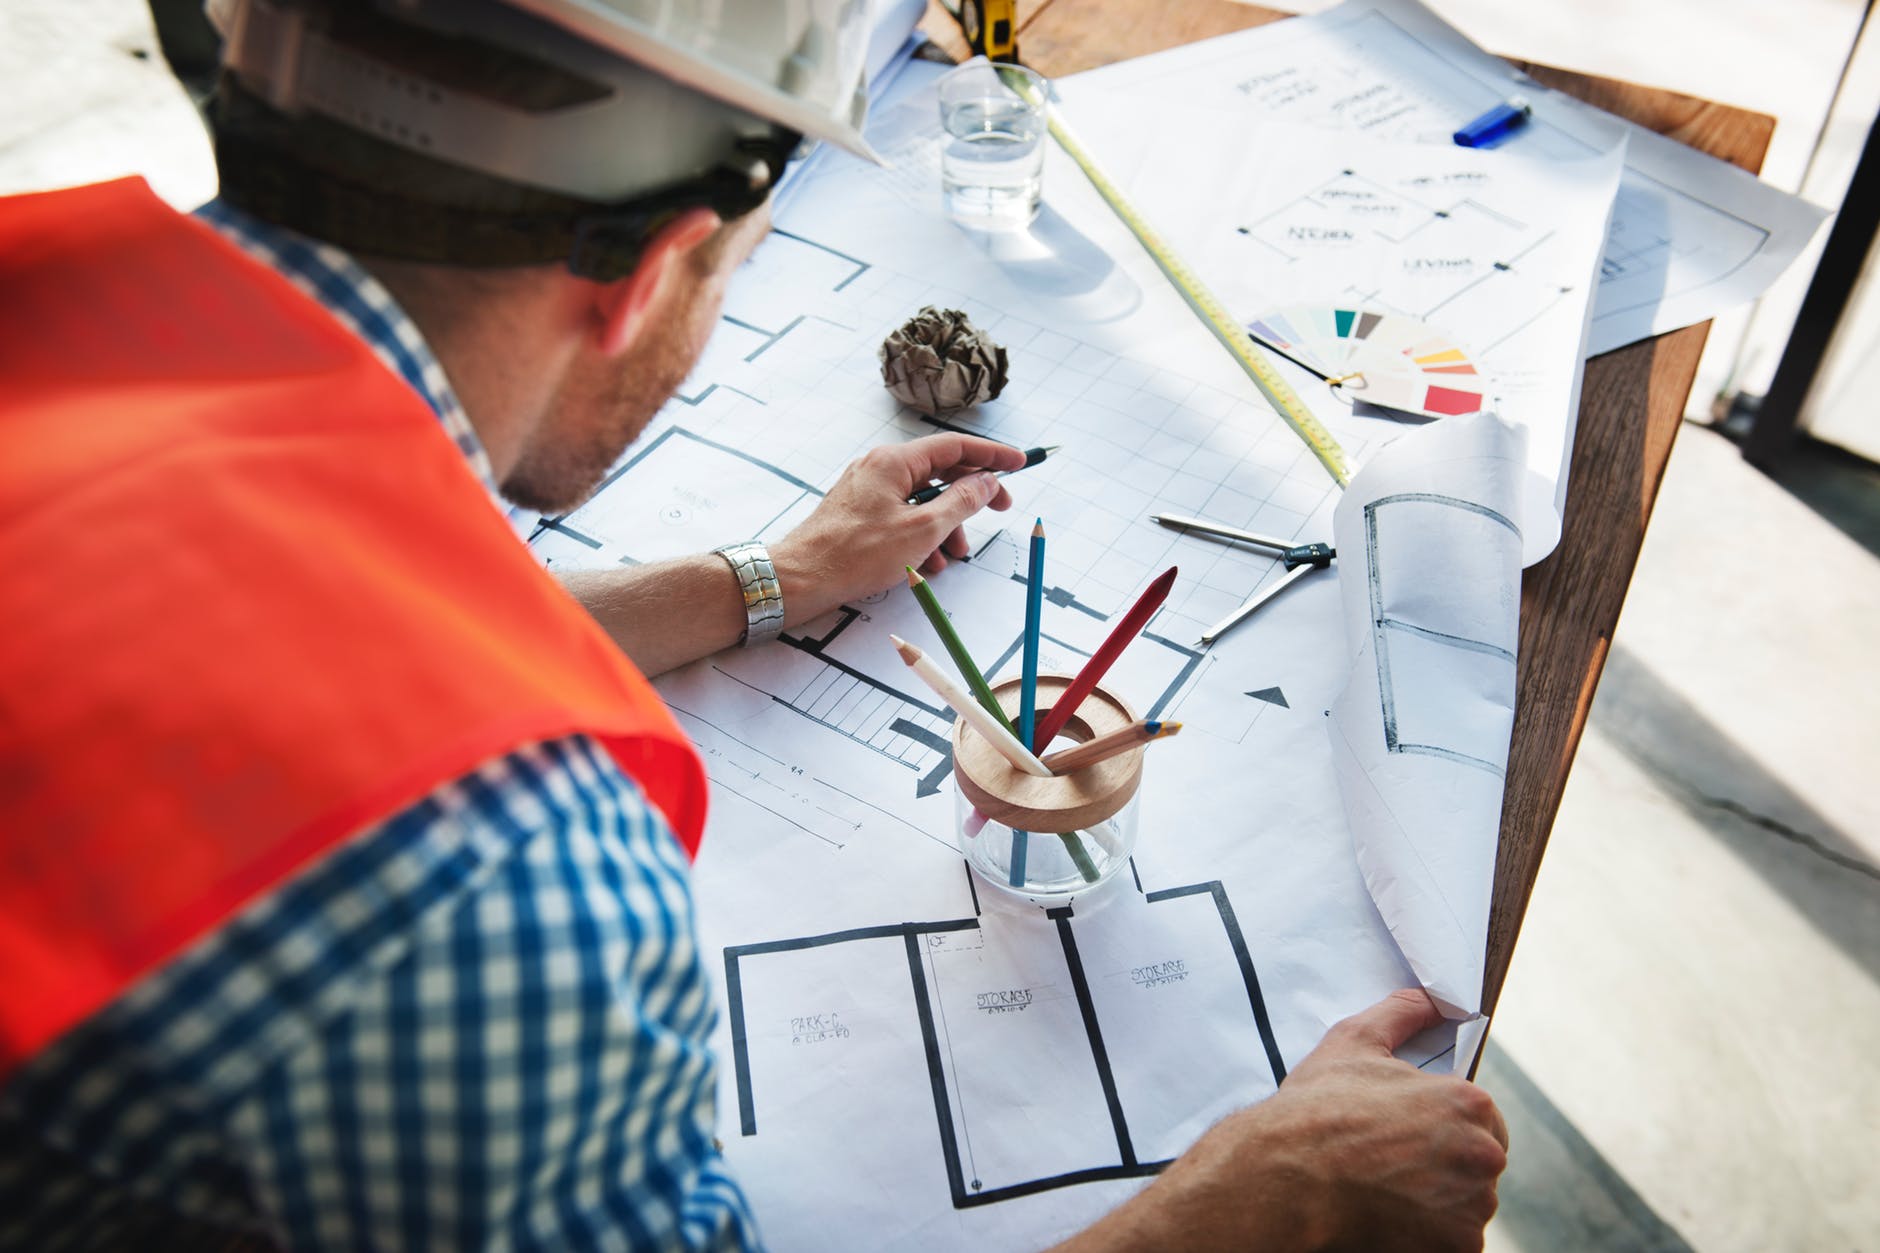 man wearing white hard hat leaning on table with sketch plans